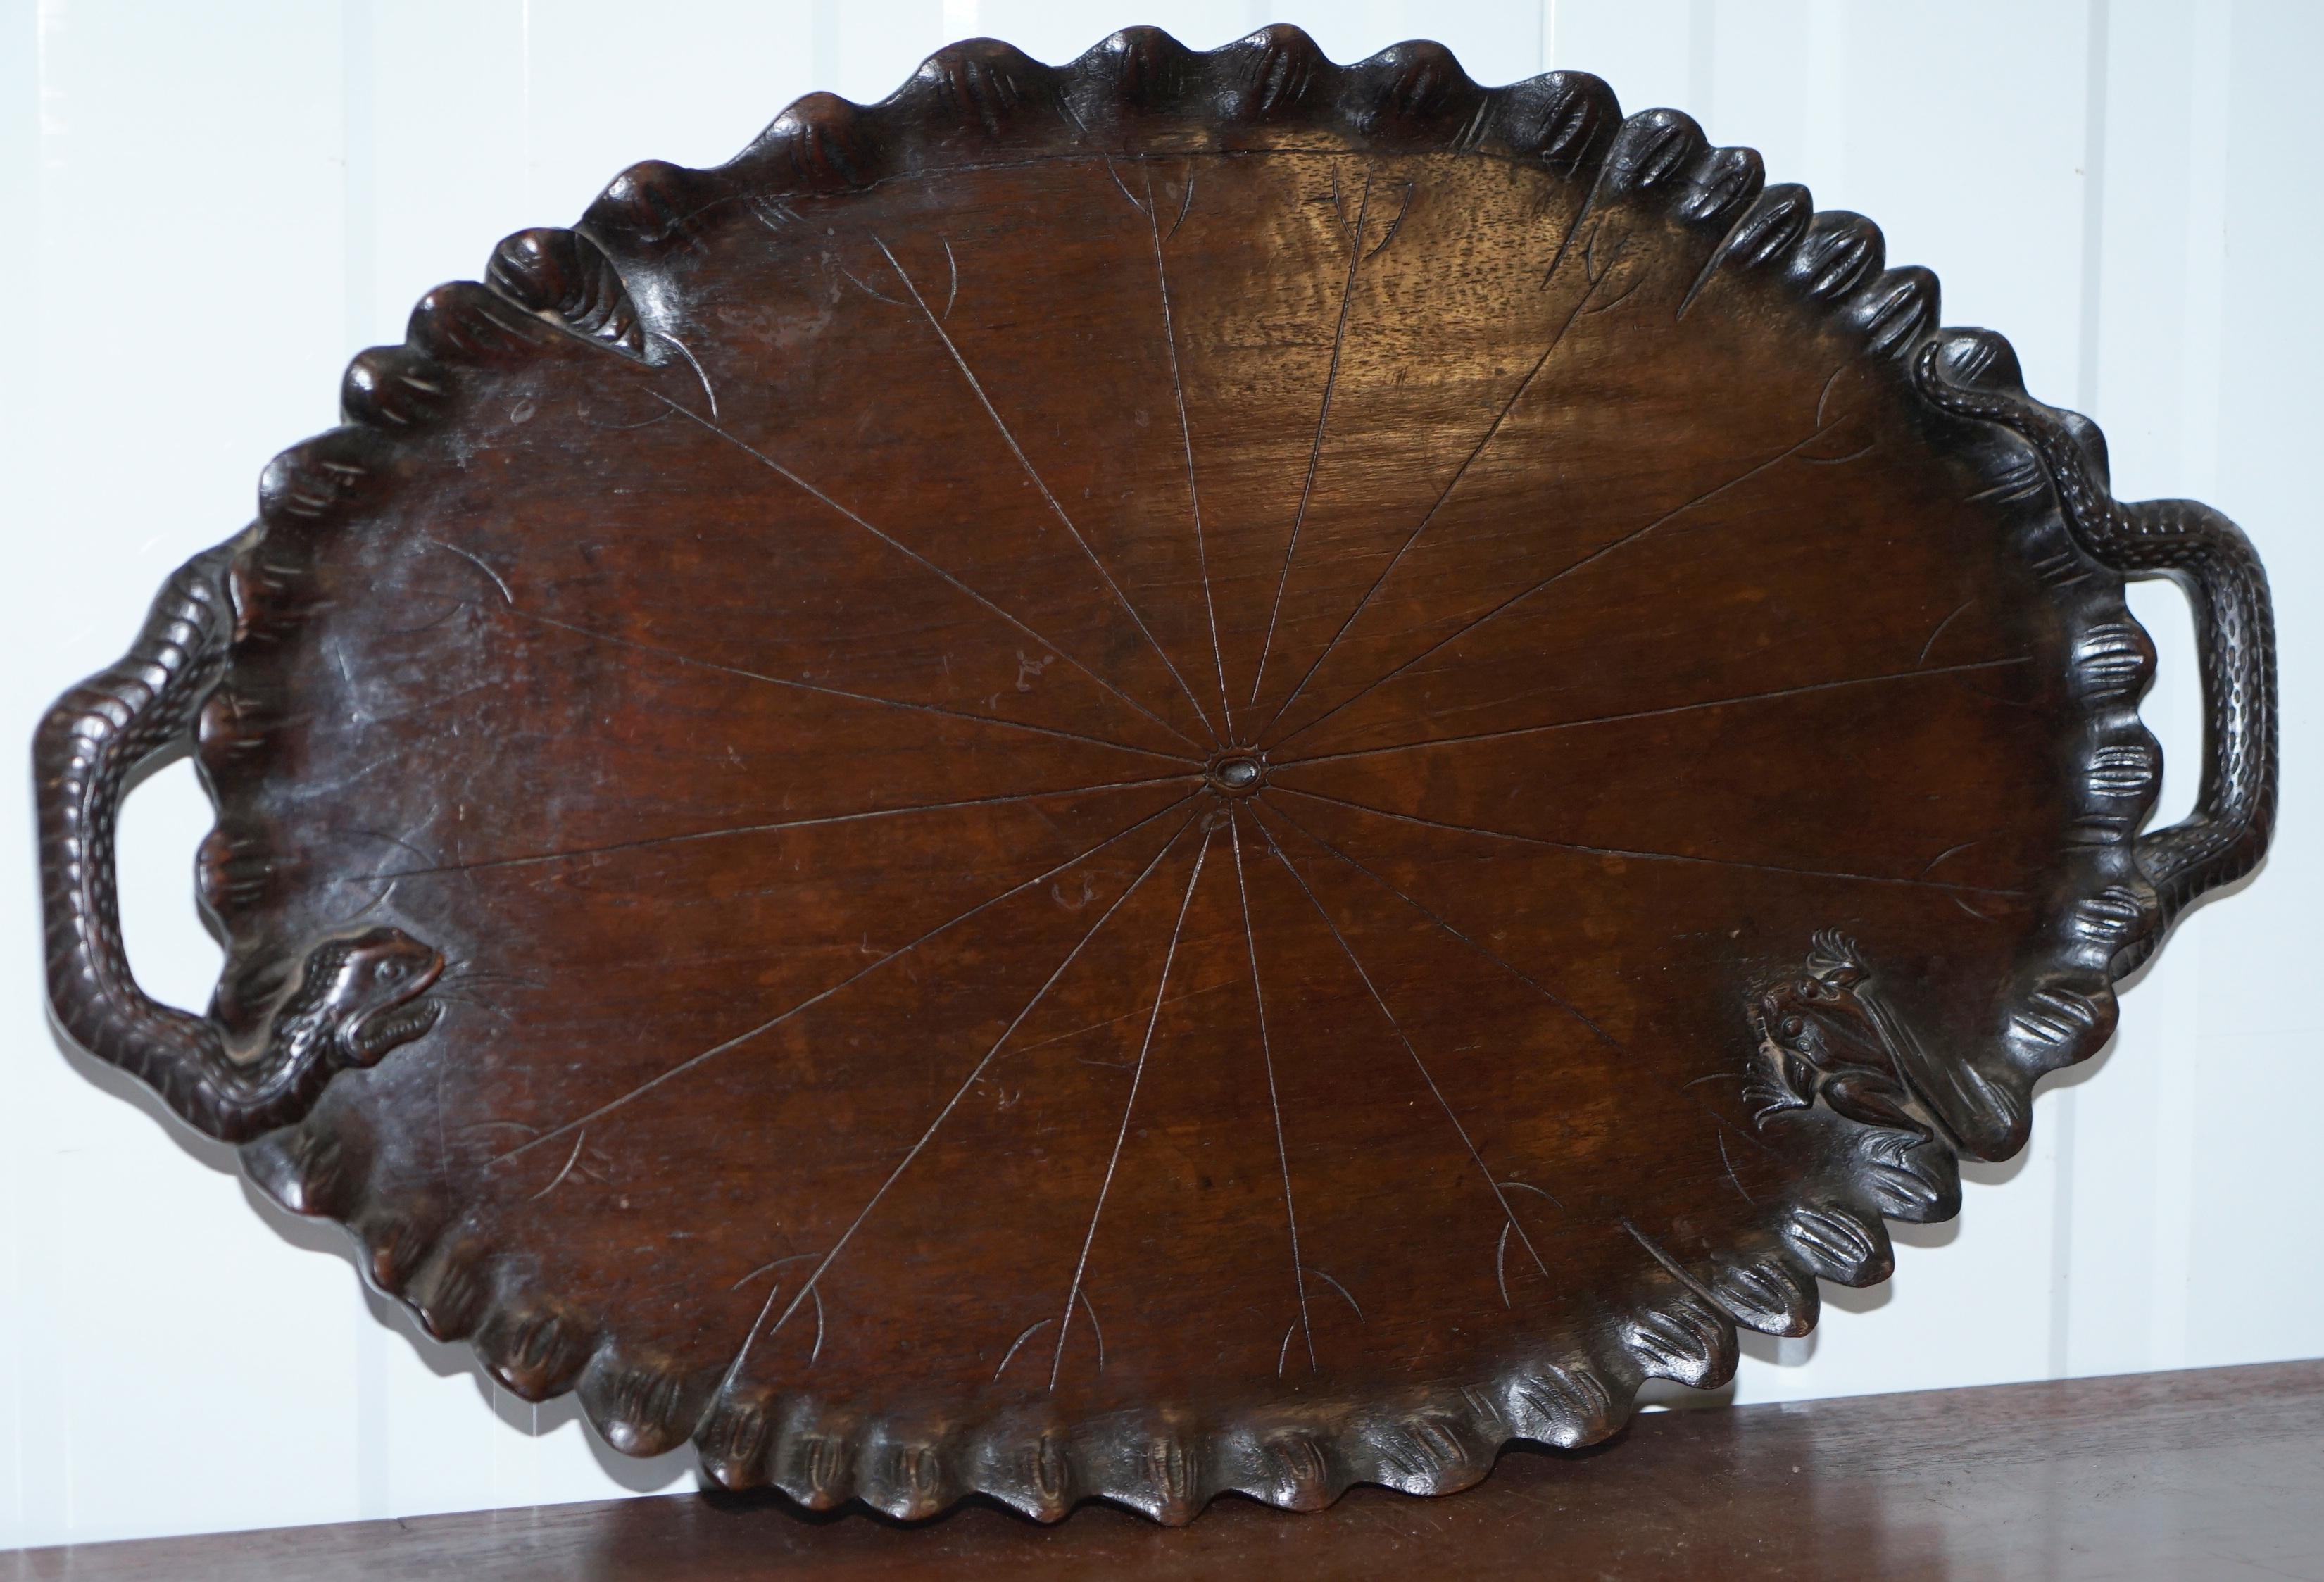 We are delighted to offer for sale this very rare circa 1850 hand-carved from a single piece of timber serving tray with snake handles chasing a frog

A very good looking and exquisitely carved piece, the handles are made up of the snake's body